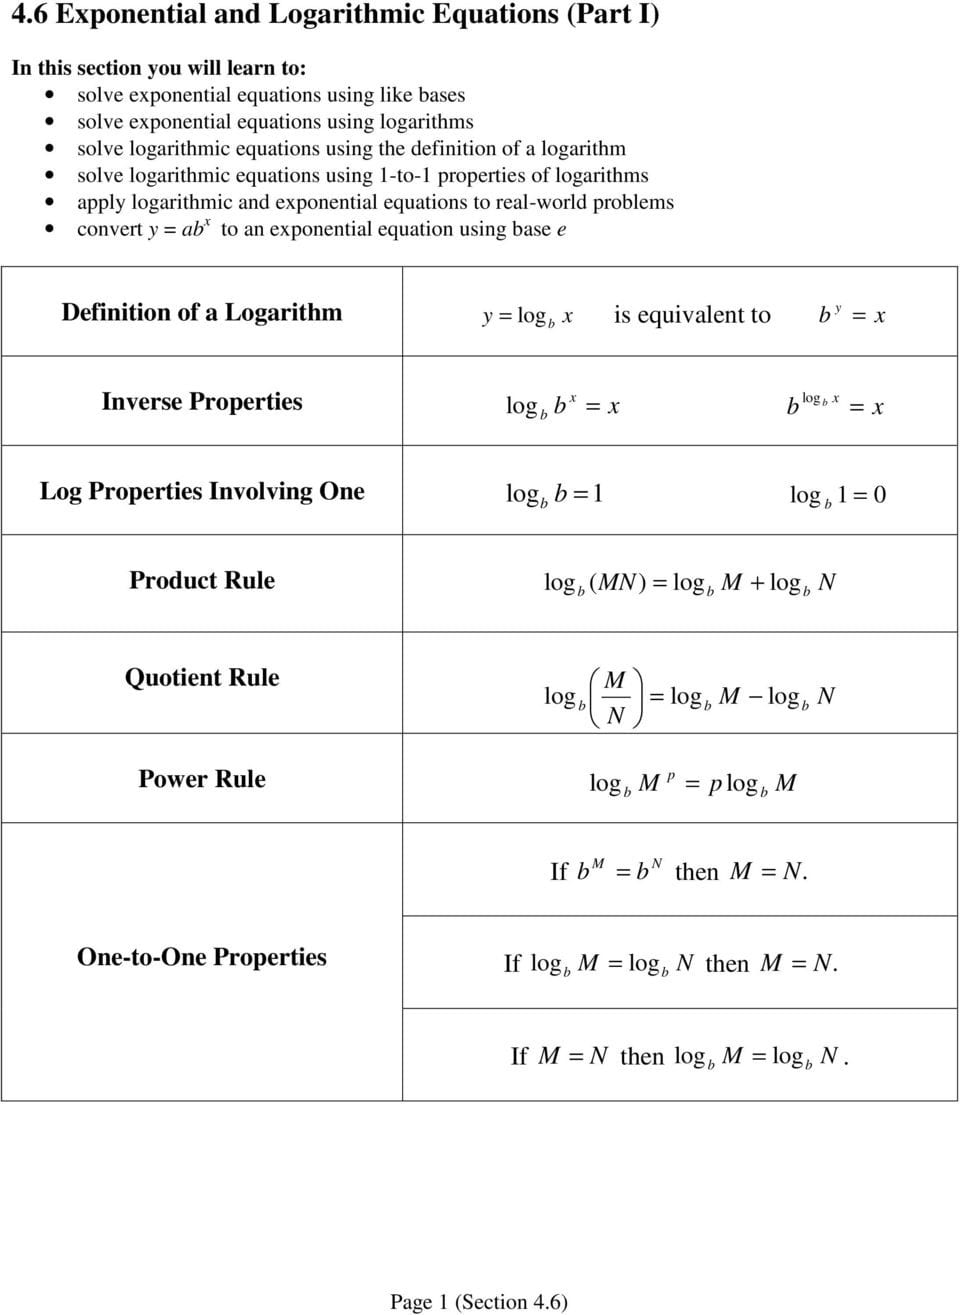 46 Exponential And Logarithmic Equations Part I  Pdf